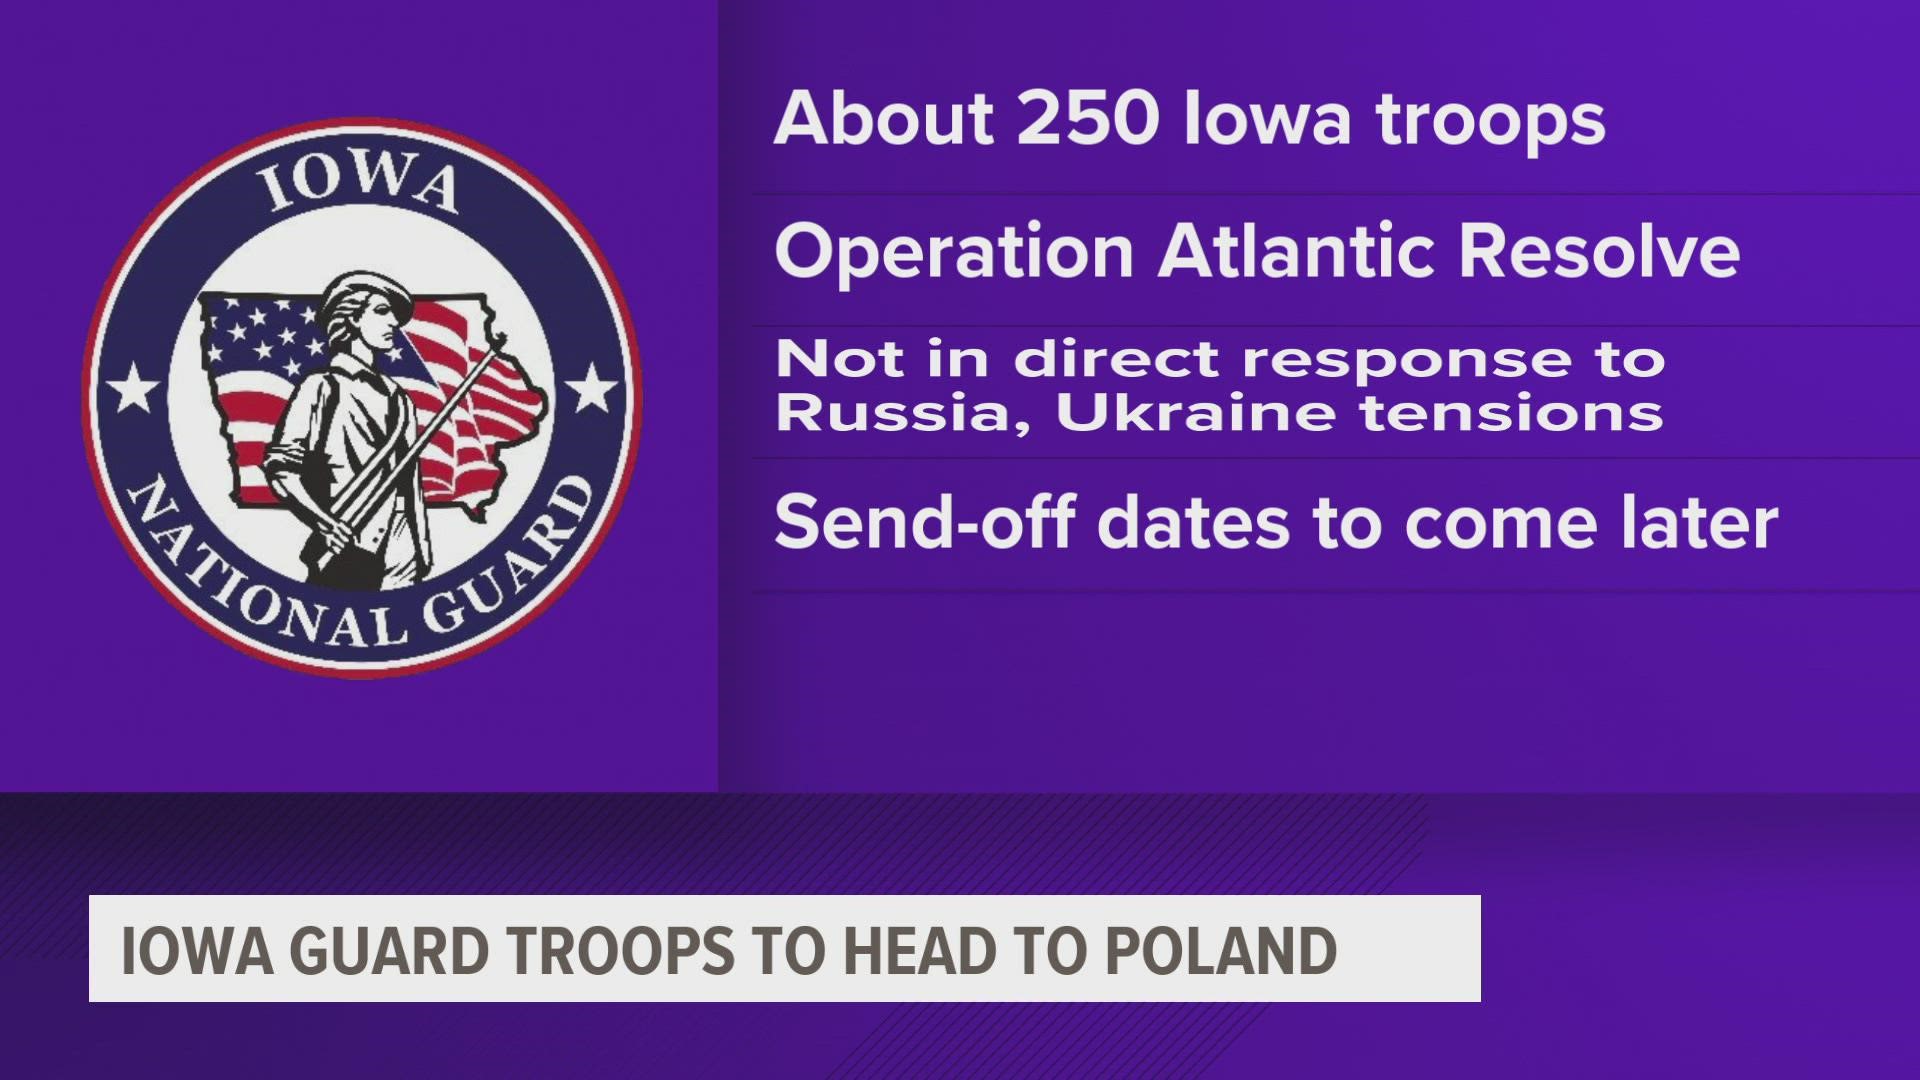 A spokesperson for the Iowa National Guard said the deployment is not in direct response to the tensions between Russia and Ukraine.